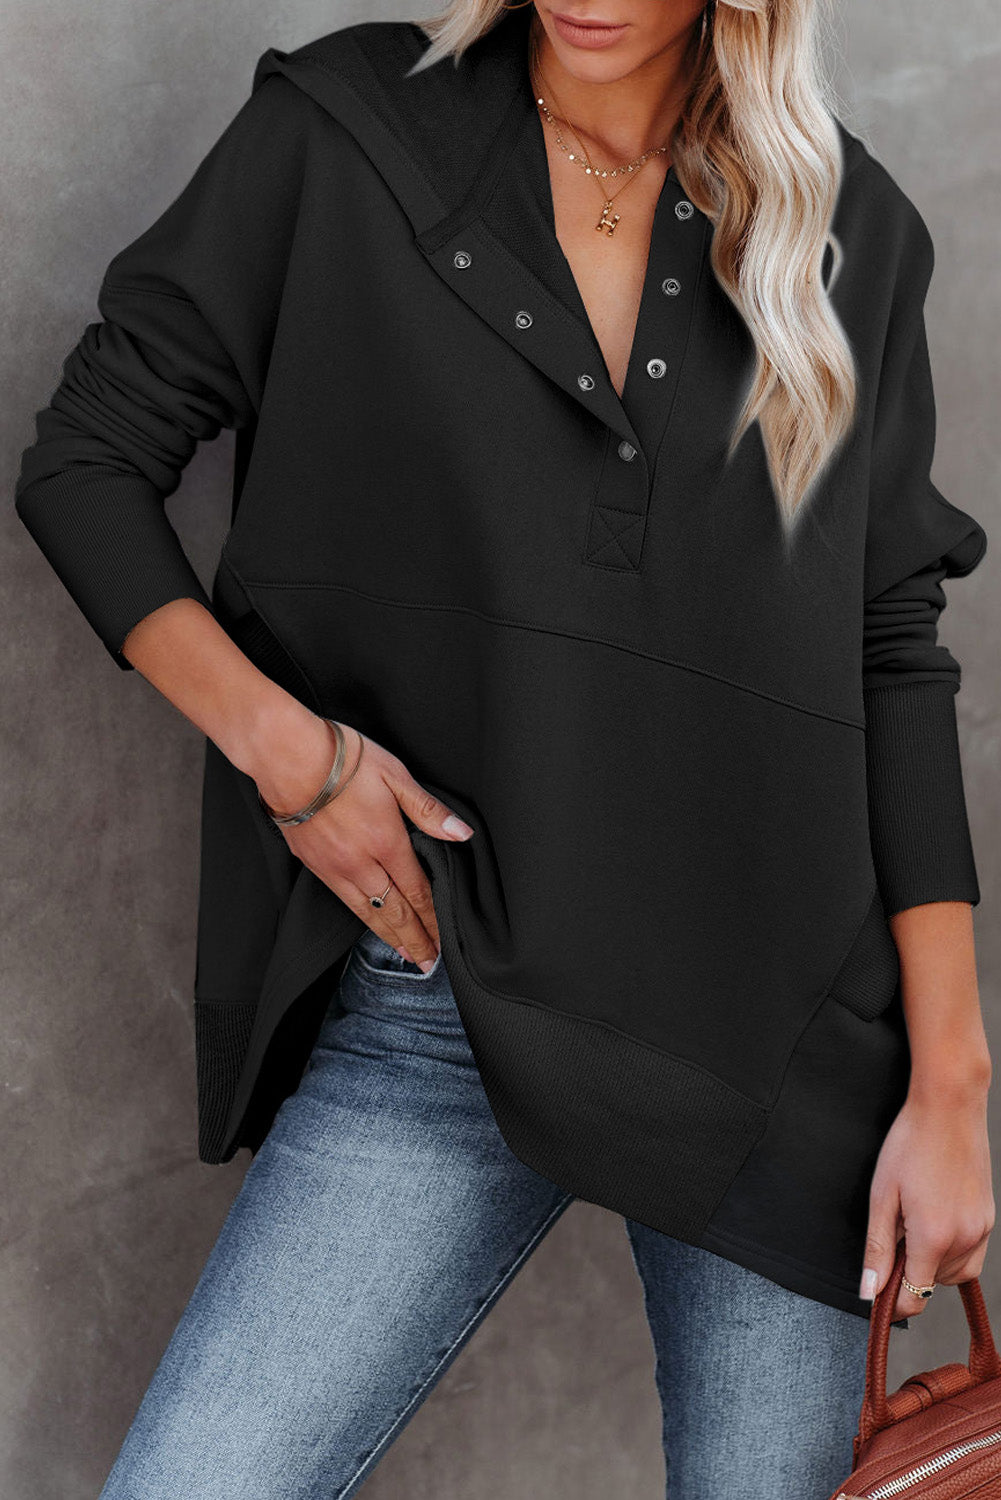 LC25311926-2-S, LC25311926-2-M, LC25311926-2-L, LC25311926-2-XL, LC25311926-2-2XL, Black Batwing Sleeve Pocketed Henley Hoodie